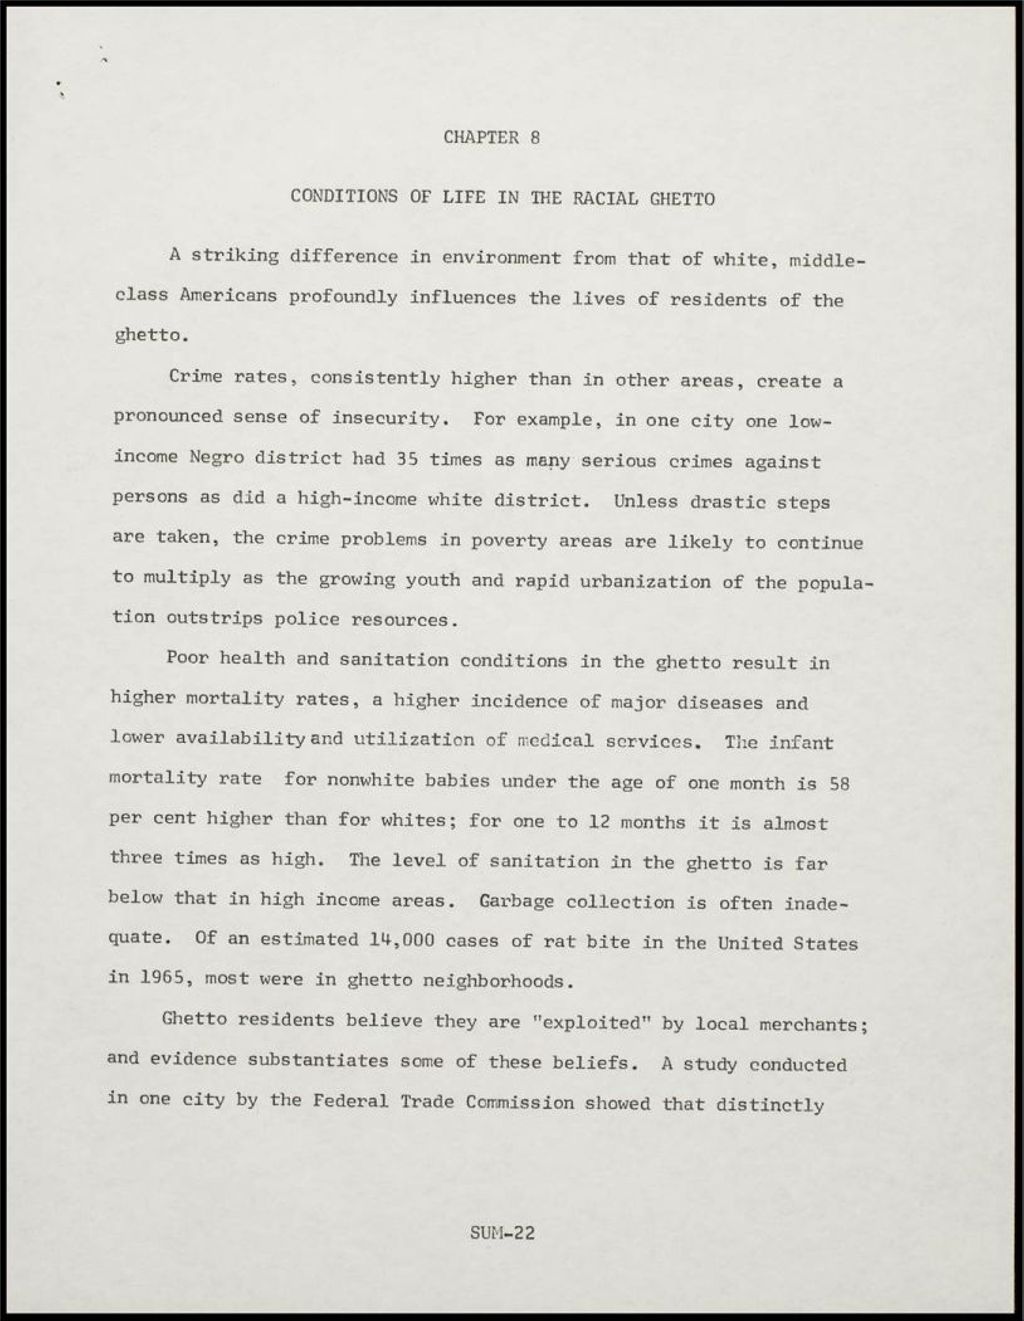 Report of the National Advisory Commission on Civil Disorders, 1968 (Folder III-2487)